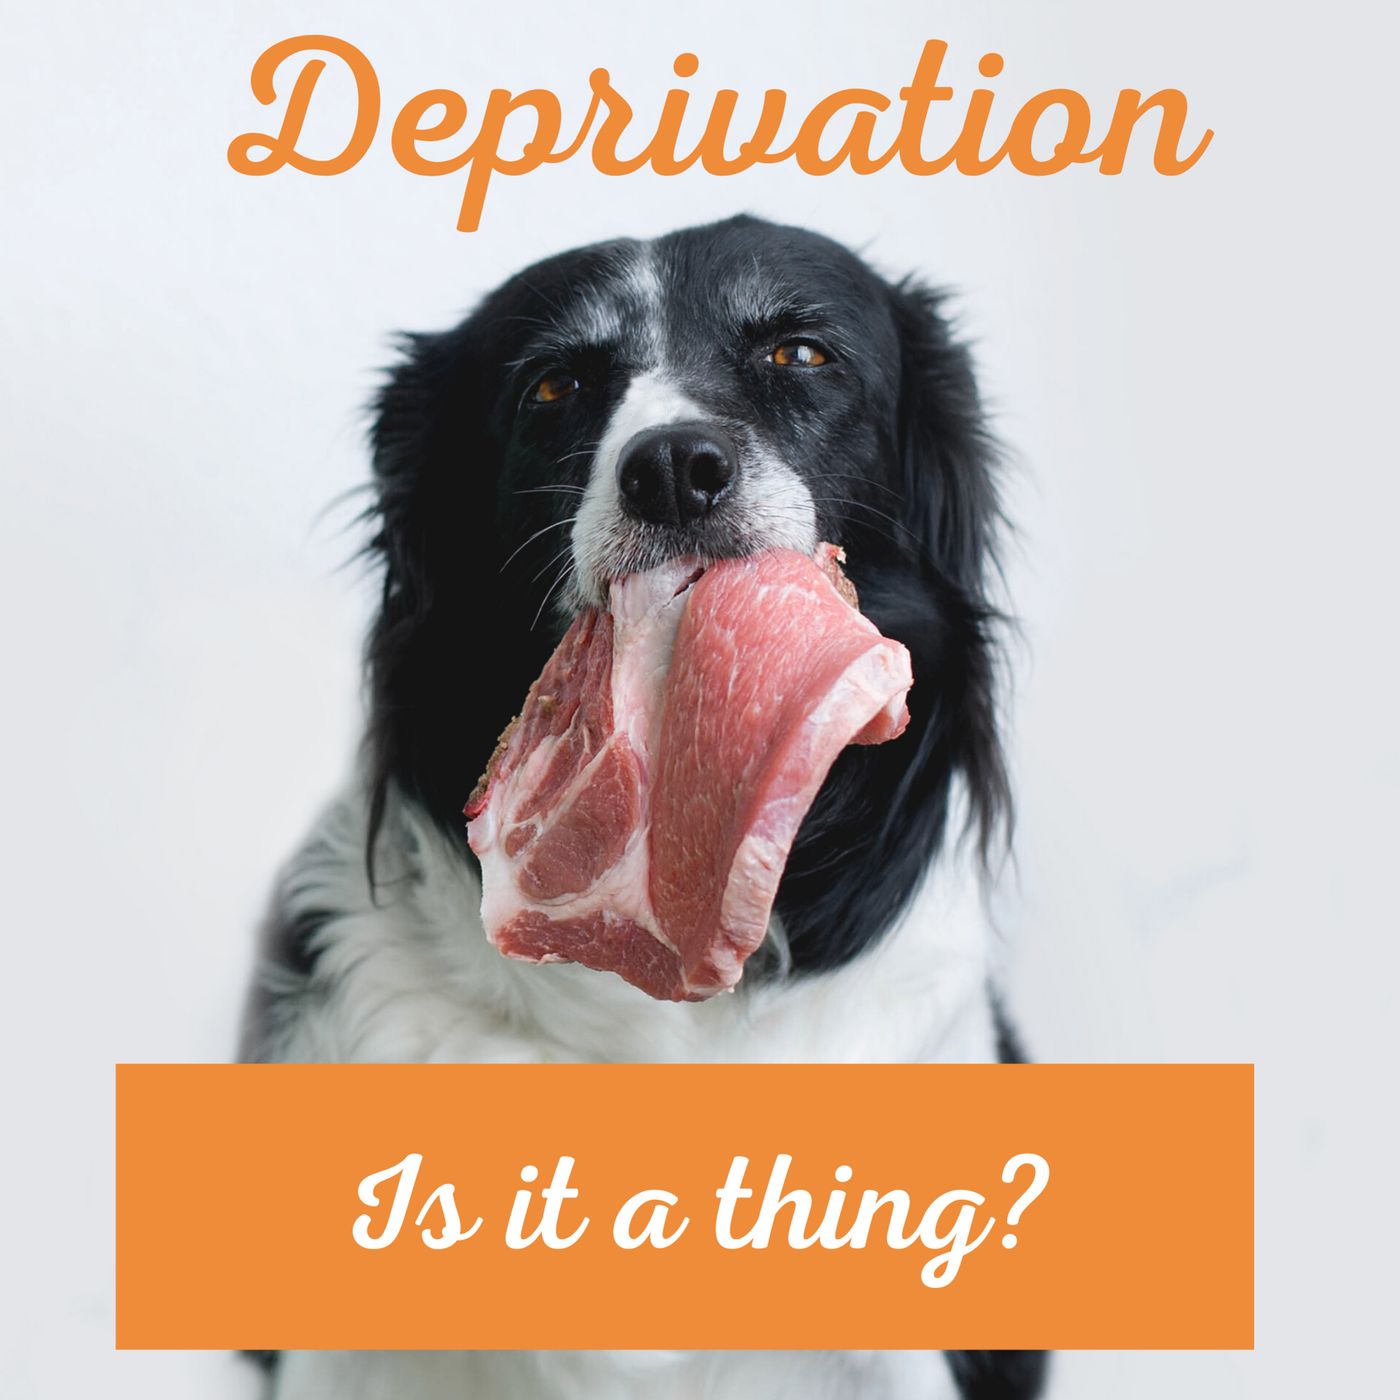 Deprivation: How Does this Affect Our Dogs?